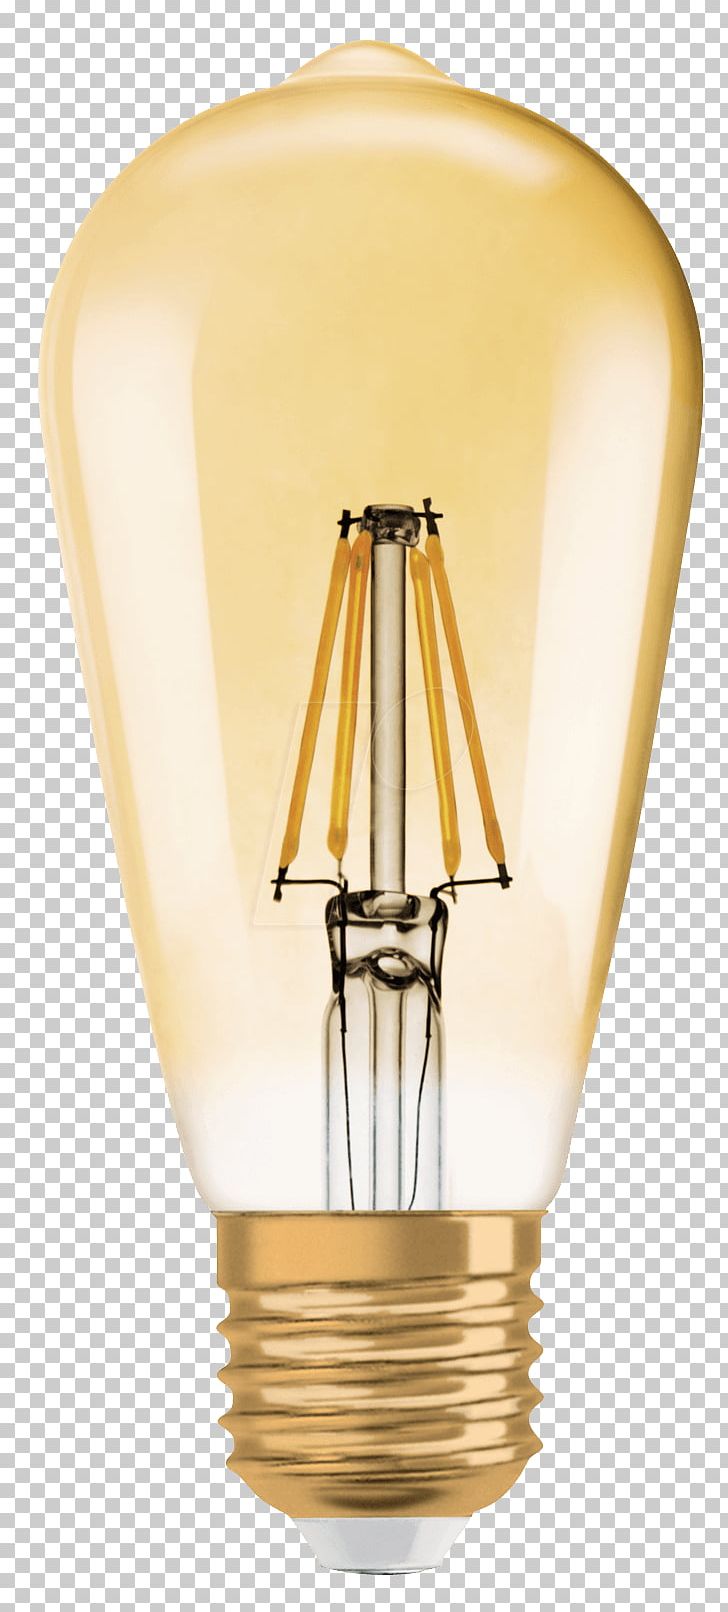 LED Lamp LED Filament Incandescent Light Bulb Light Fixture Lighting PNG, Clipart, Brass, Ceiling Fixture, Edison Screw, Electrical Filament, Home Building Free PNG Download